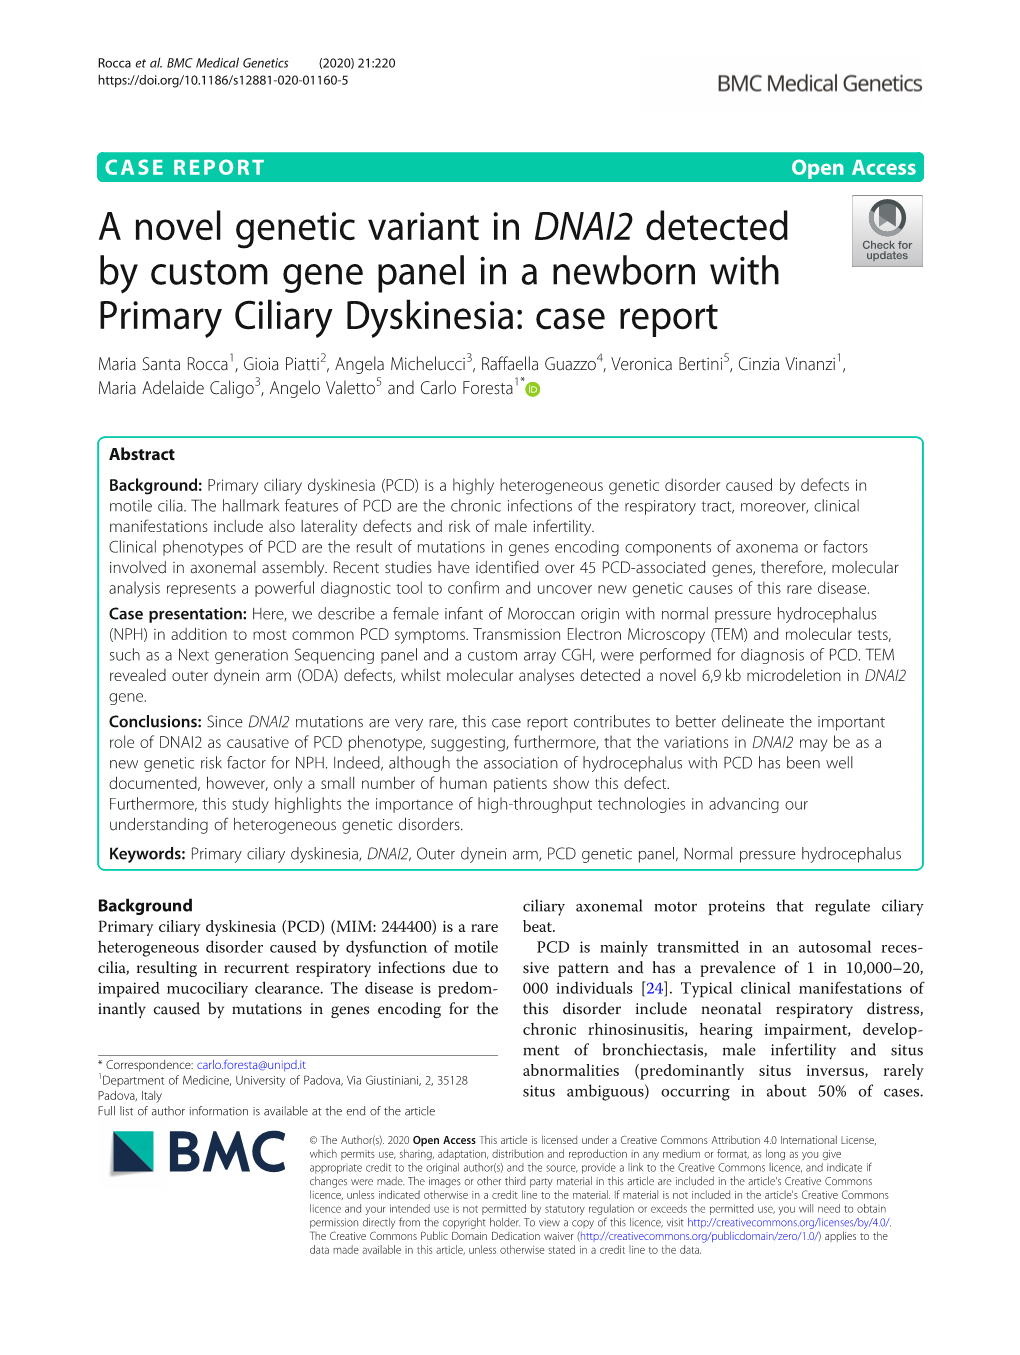 A Novel Genetic Variant in DNAI2 Detected by Custom Gene Panel in a Newborn with Primary Ciliary Dyskinesia